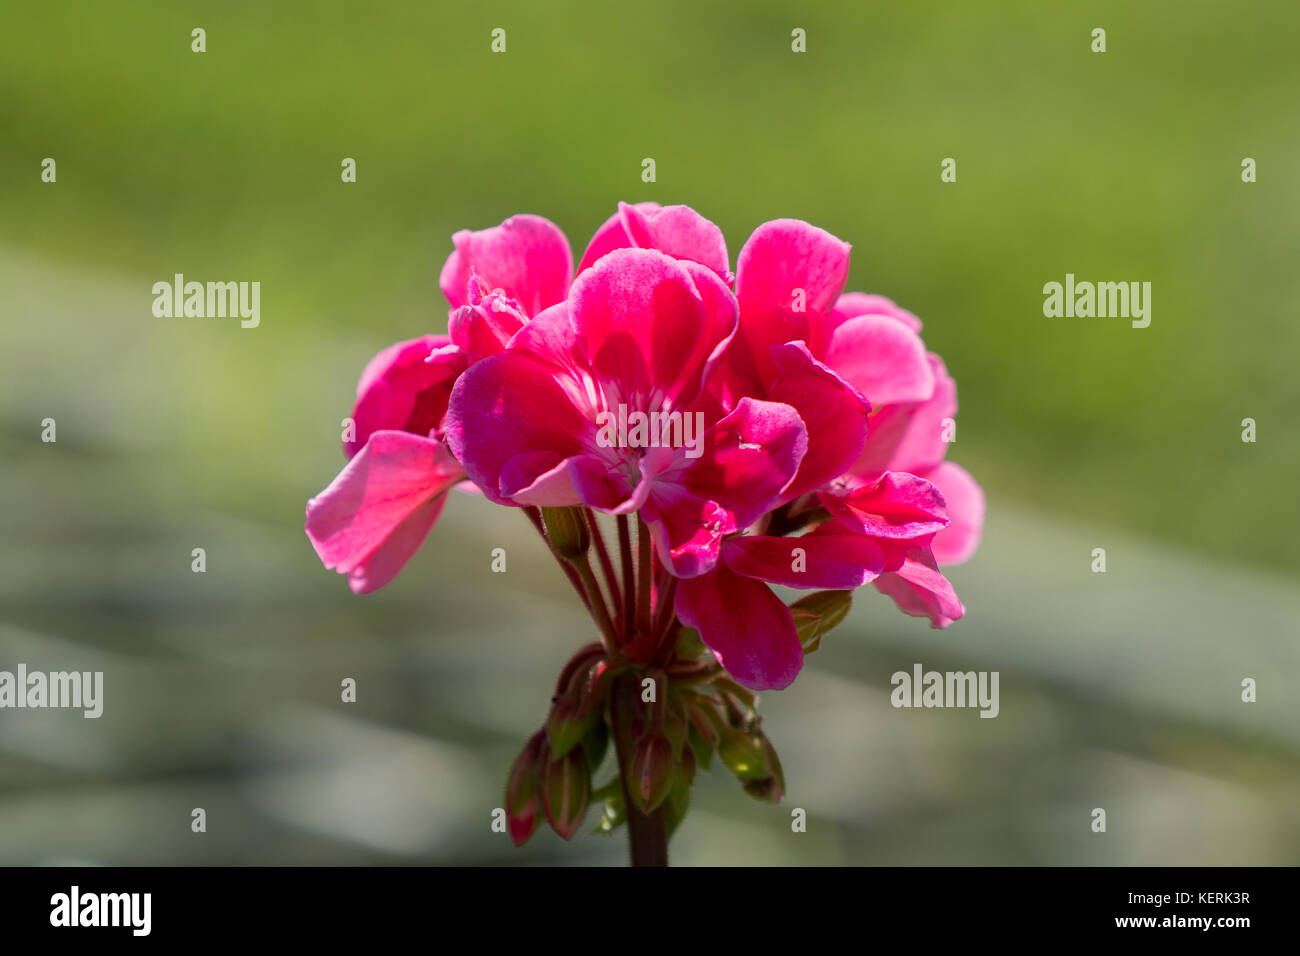 A pink flower on grass Stock Photo